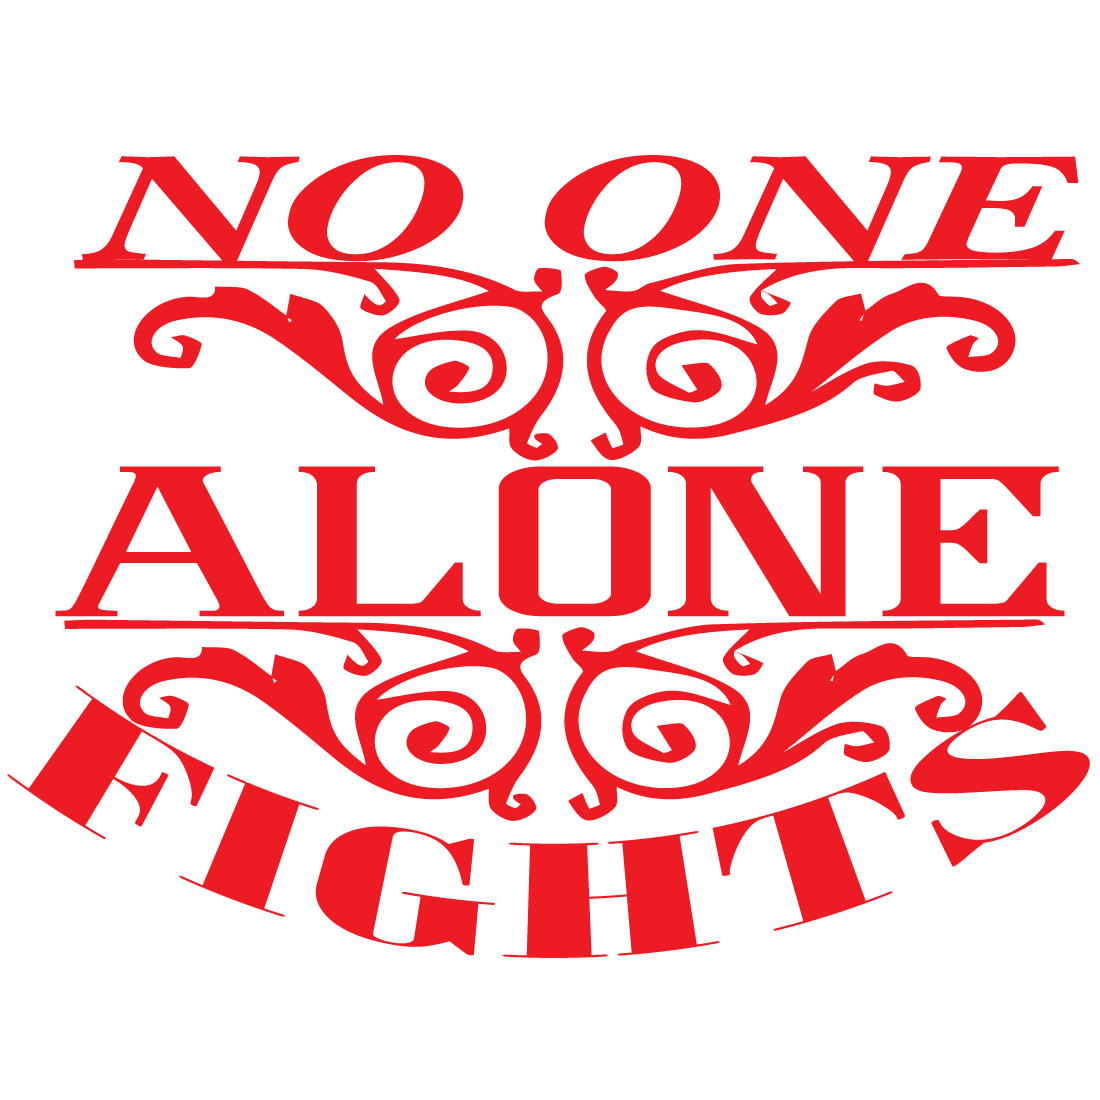 No-One-Alone--Fights preview image.